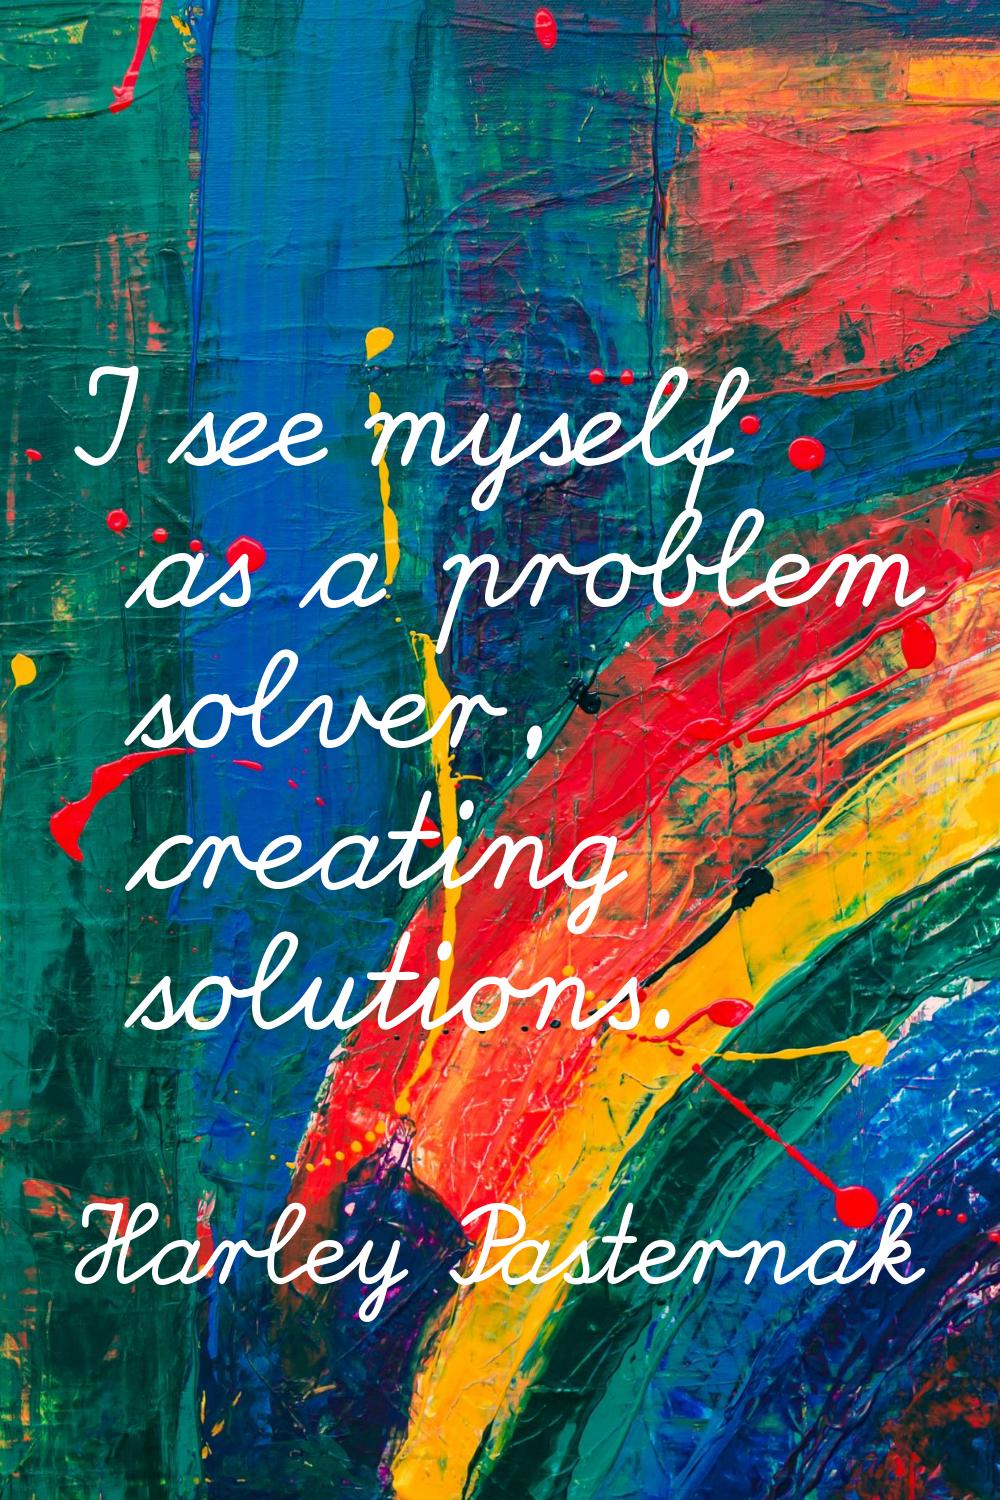 I see myself as a problem solver, creating solutions.